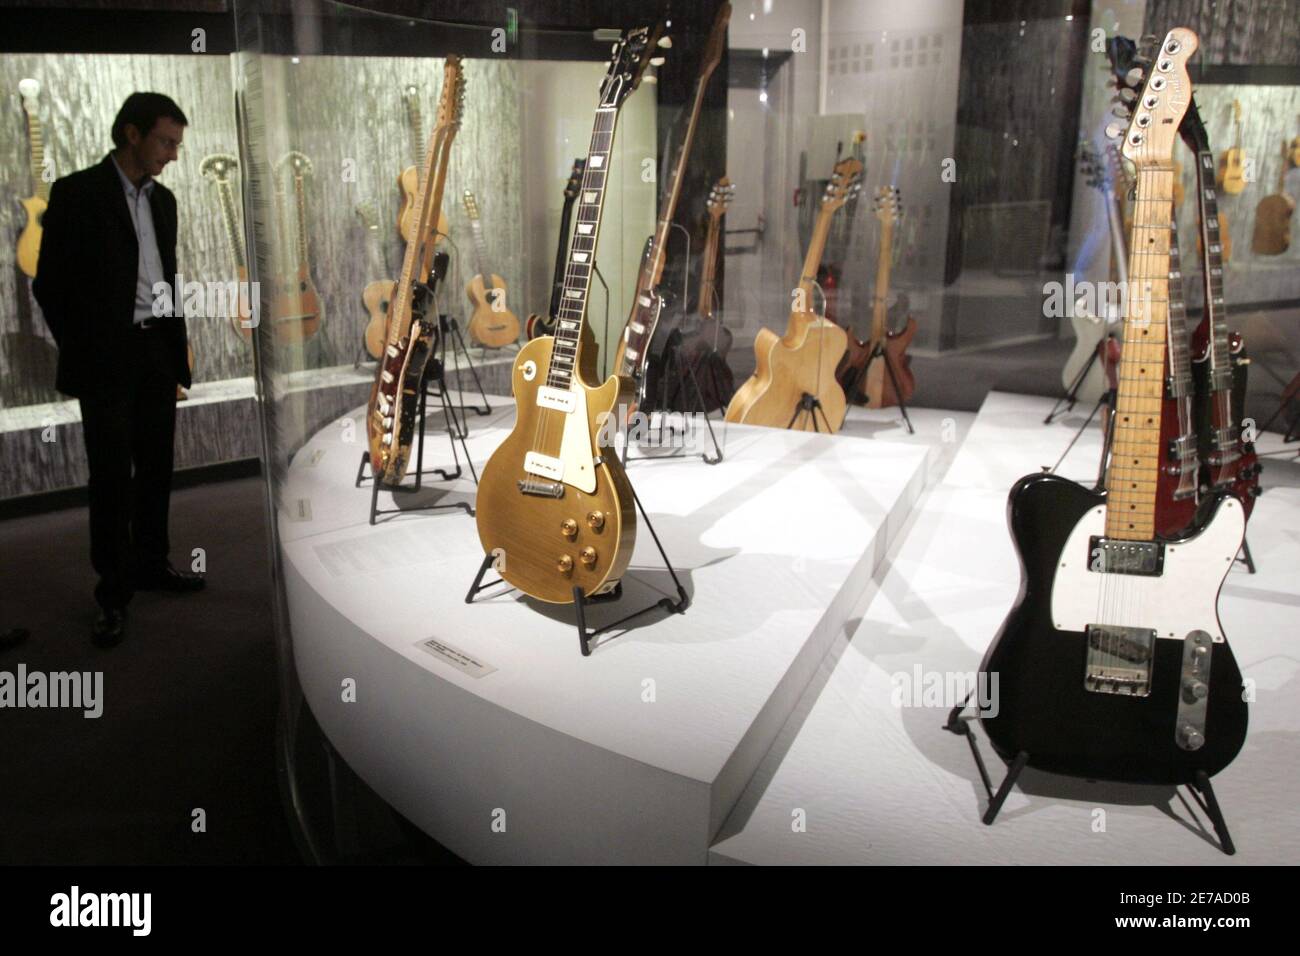 A 1955 Gibson Les Paul Goldtop guitar belonging to David Gilmour of Pink  Floyd (C) and a 1963 Fender Telecaster Custom guitar belonging to John  Lennon (R) are displayed at the "Travelling